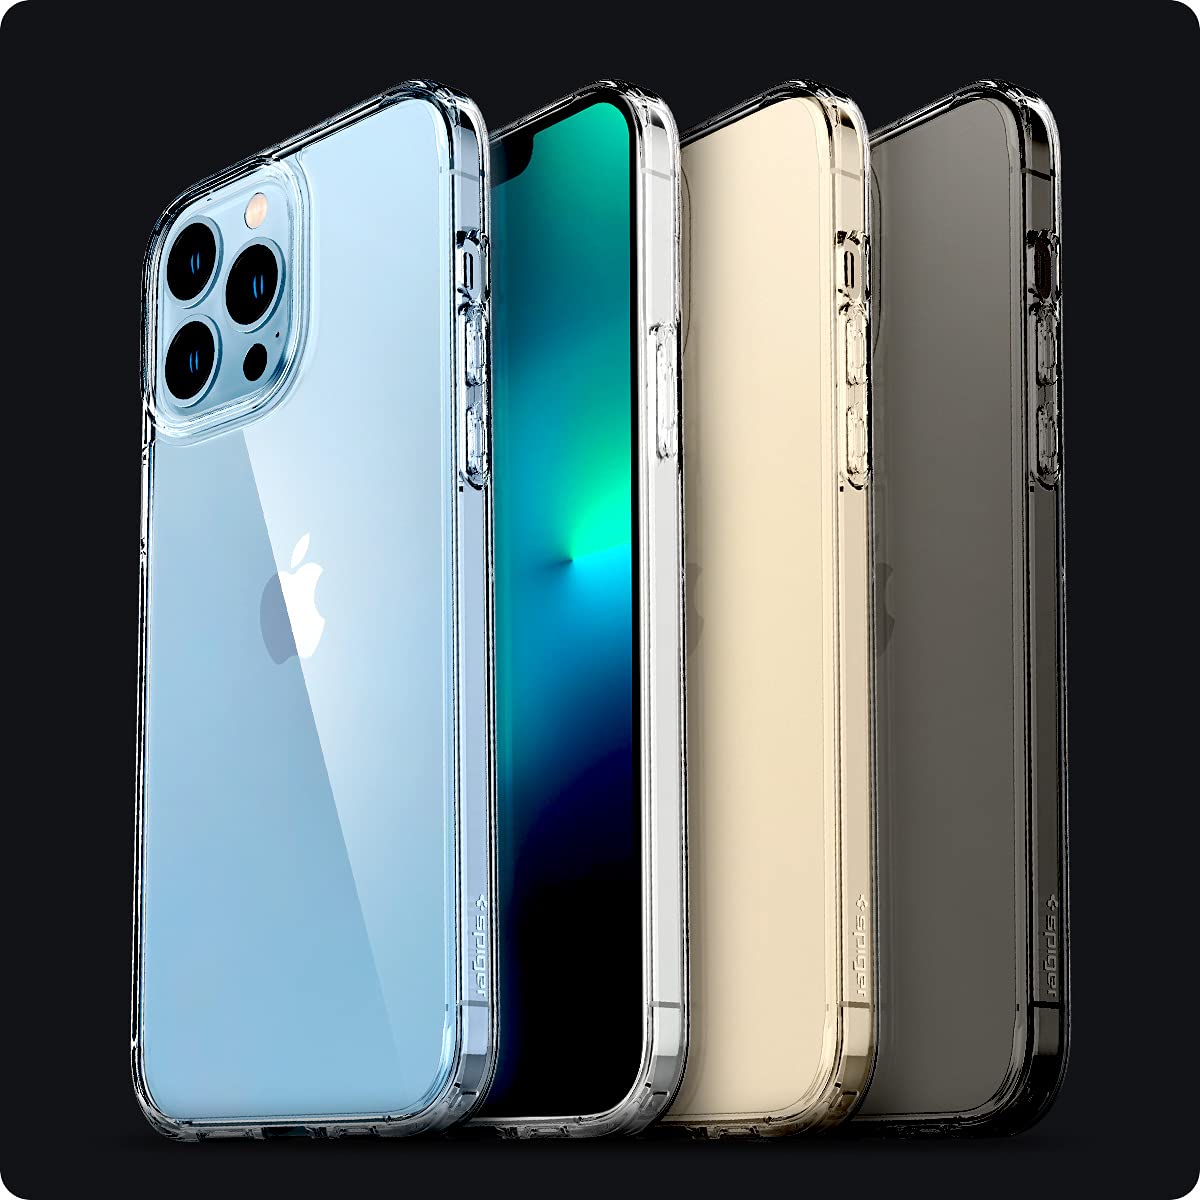 Spigen Ultra Hybrid [Anti-Yellowing Technology] Designed for iPhone 13 Pro Max Case (2021) - Crystal Clear